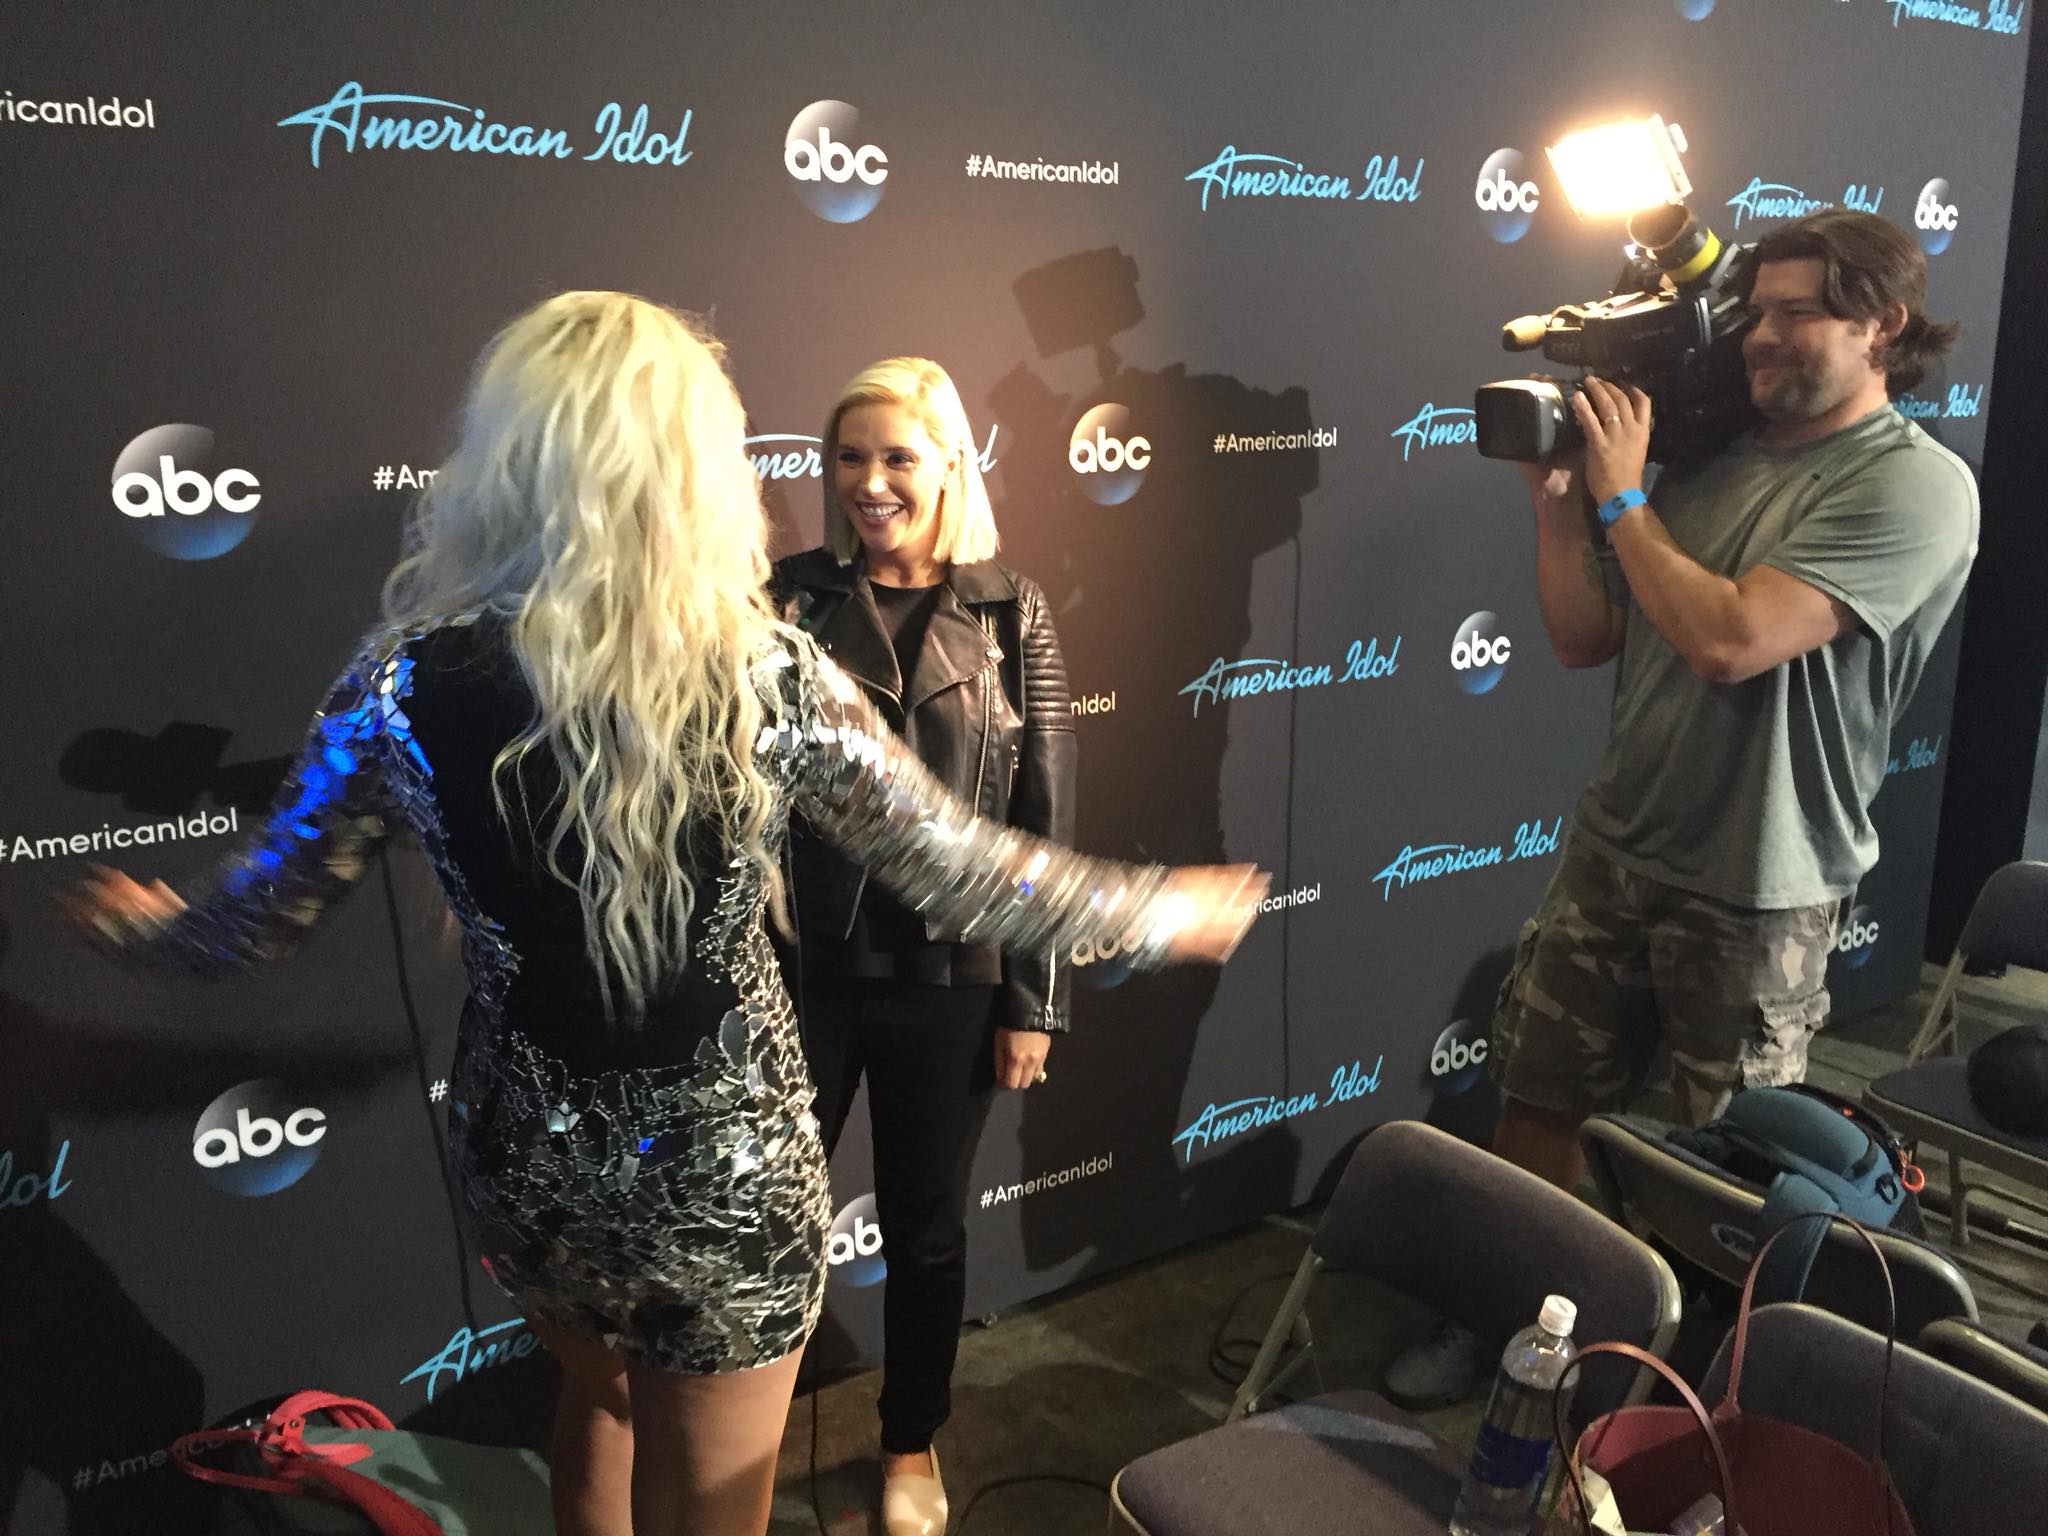 Gabby Barrett backstage interview at American Idol on May 20, 2018.
Photo credit: Jackie Cain WTAE
